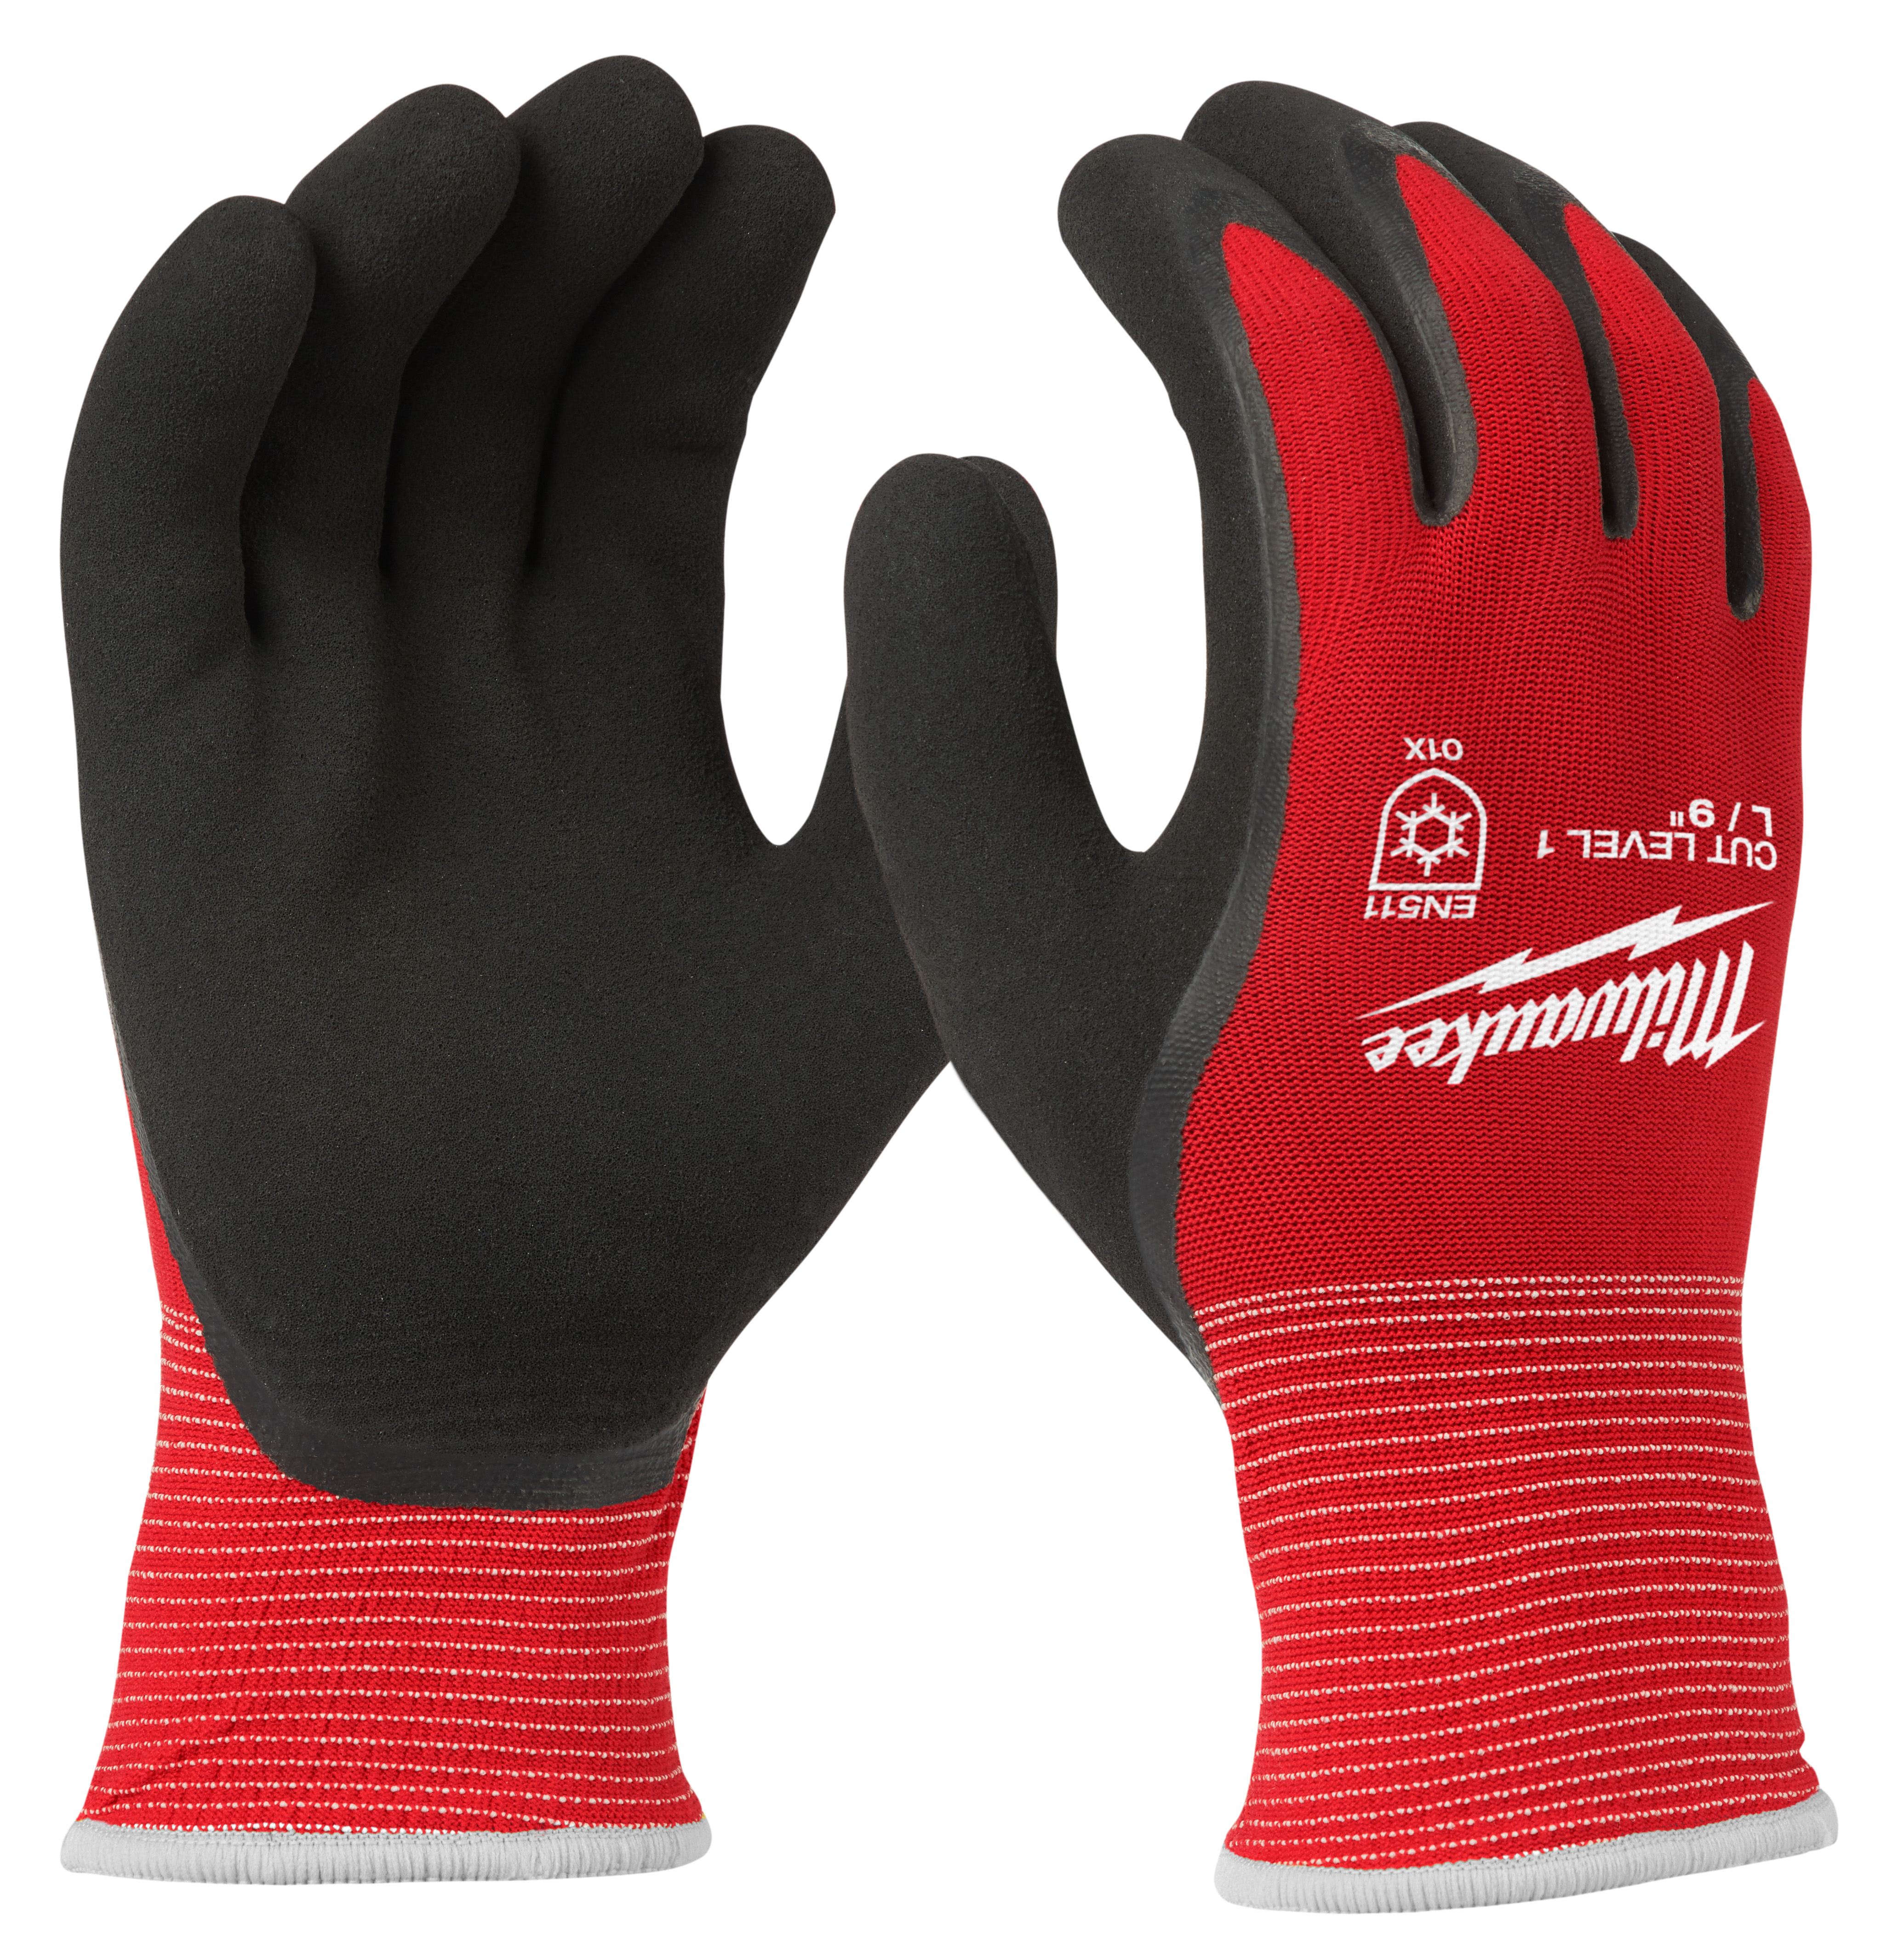 Cut Level 1 Insulated Gloves - S